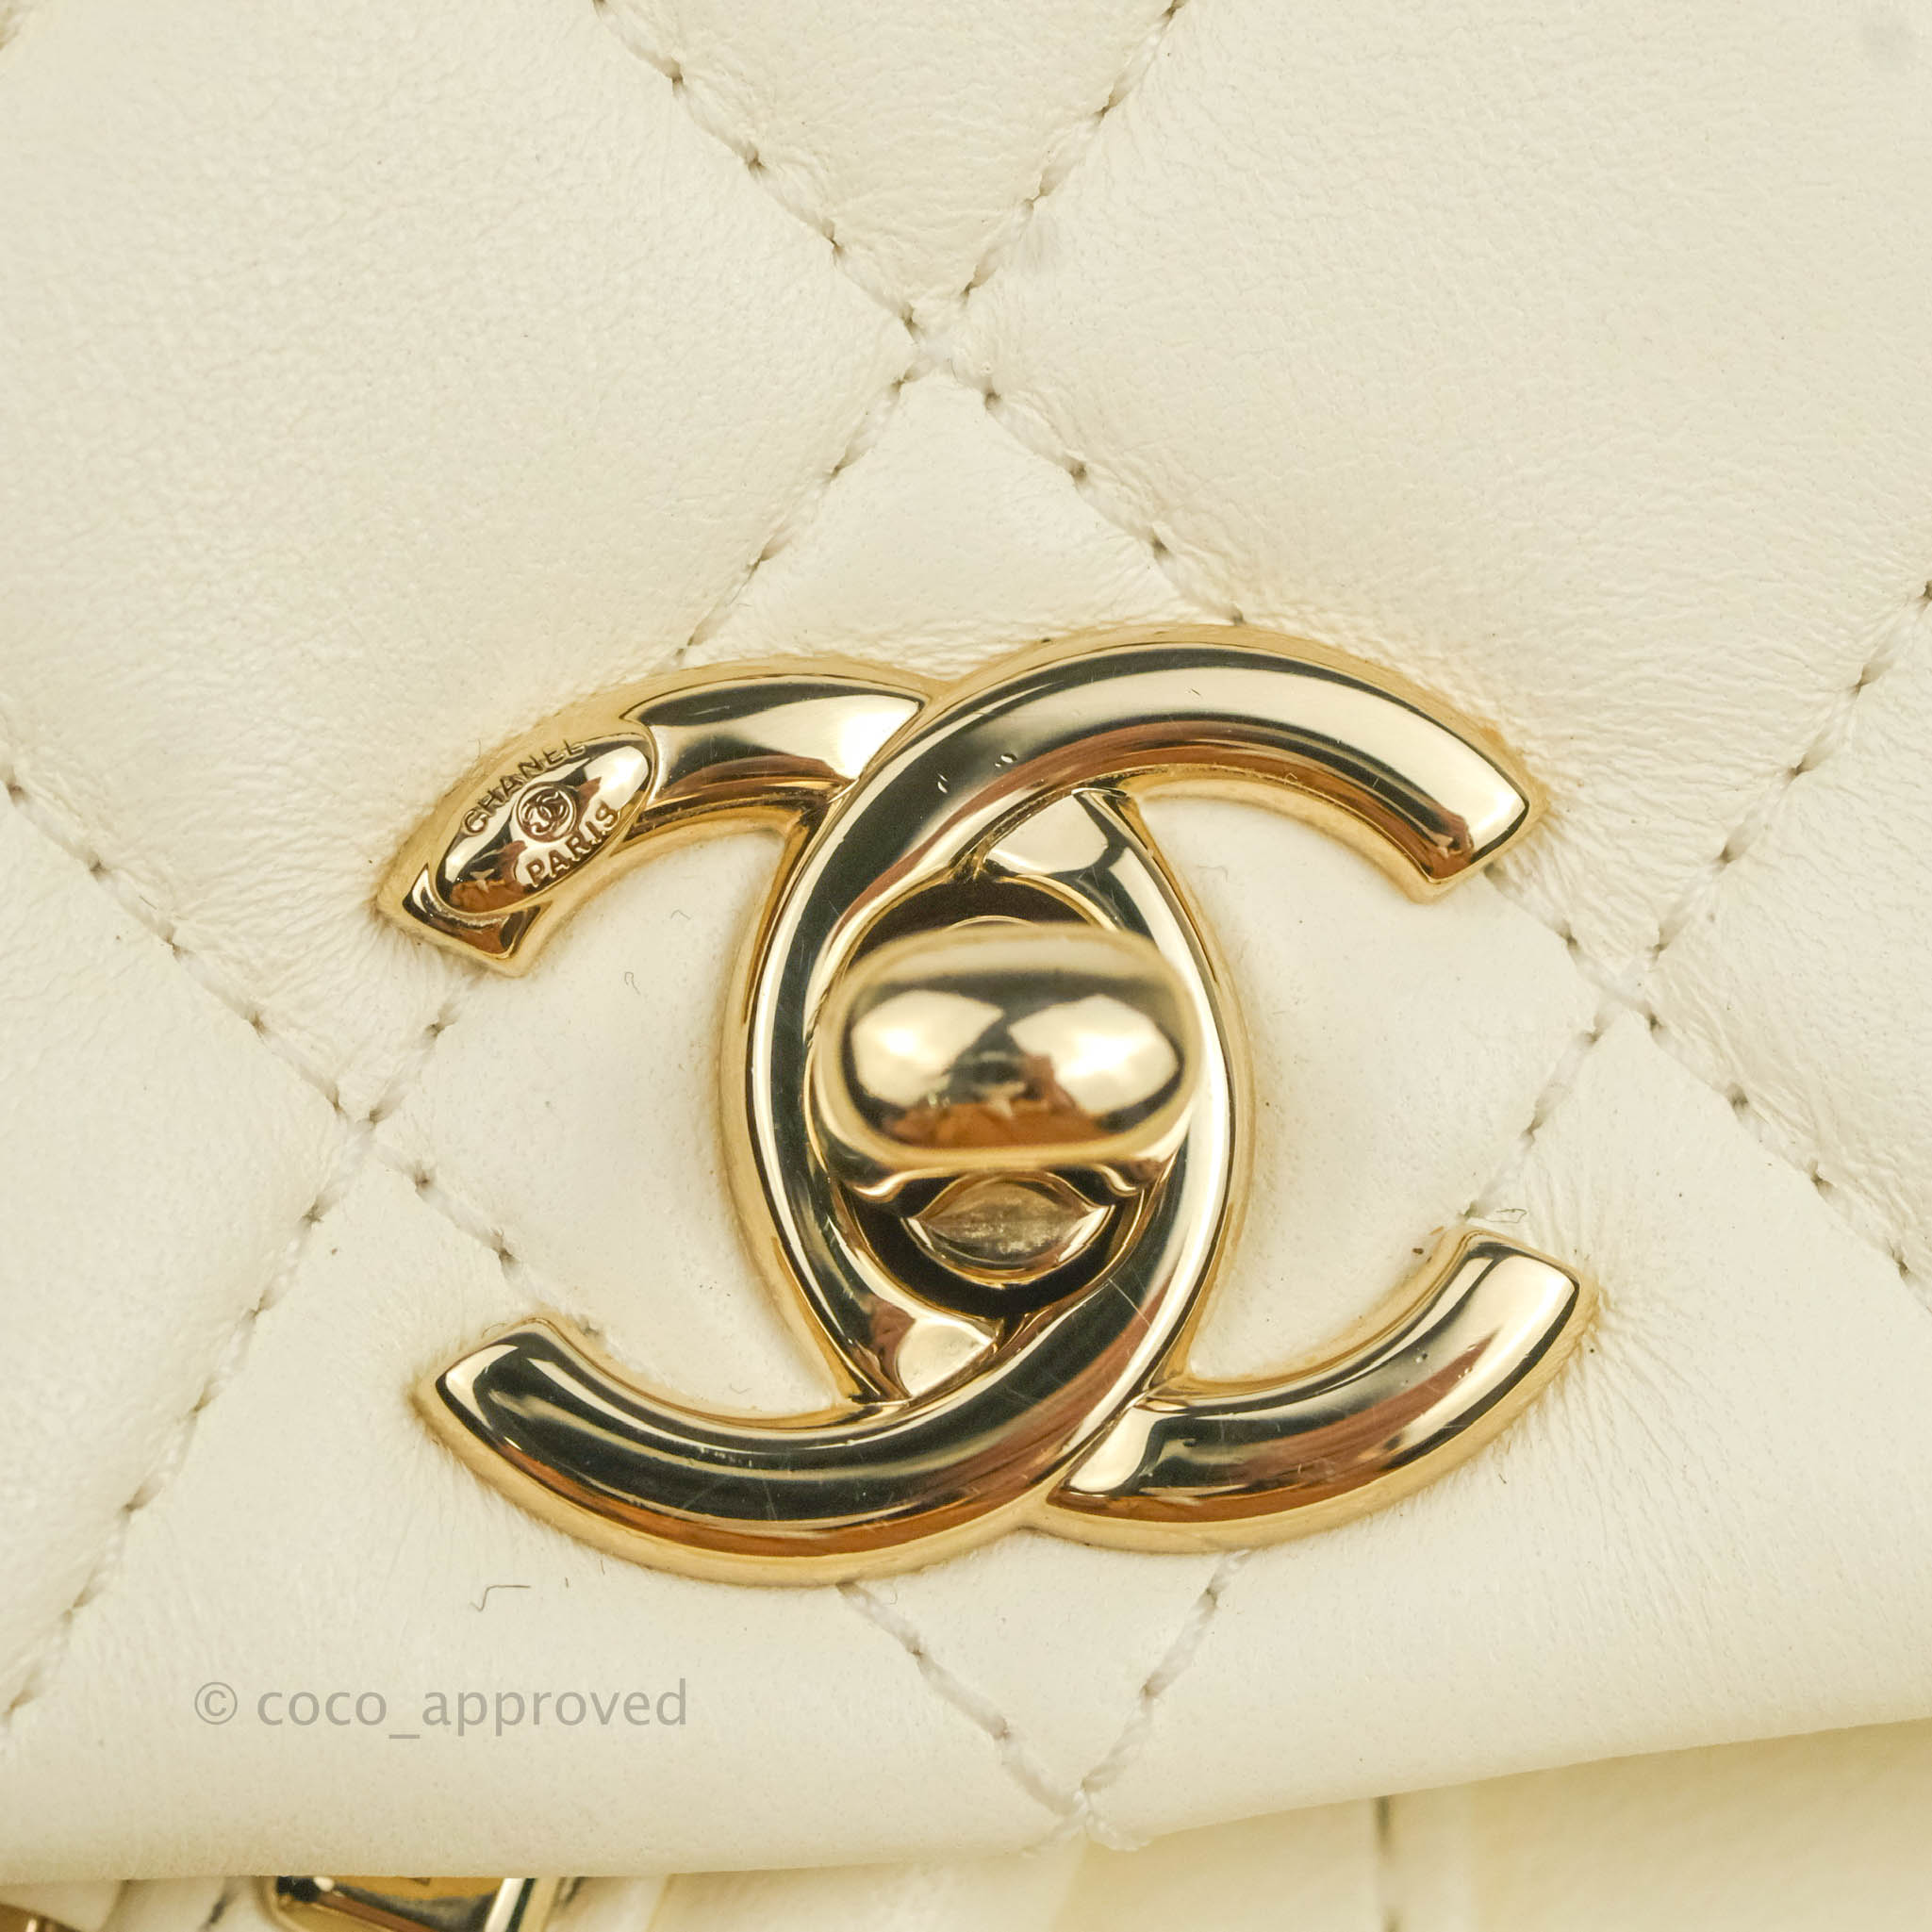 CHANEL, Bags, Authentic Vintage Chanel Mini Duma Gold Backpack